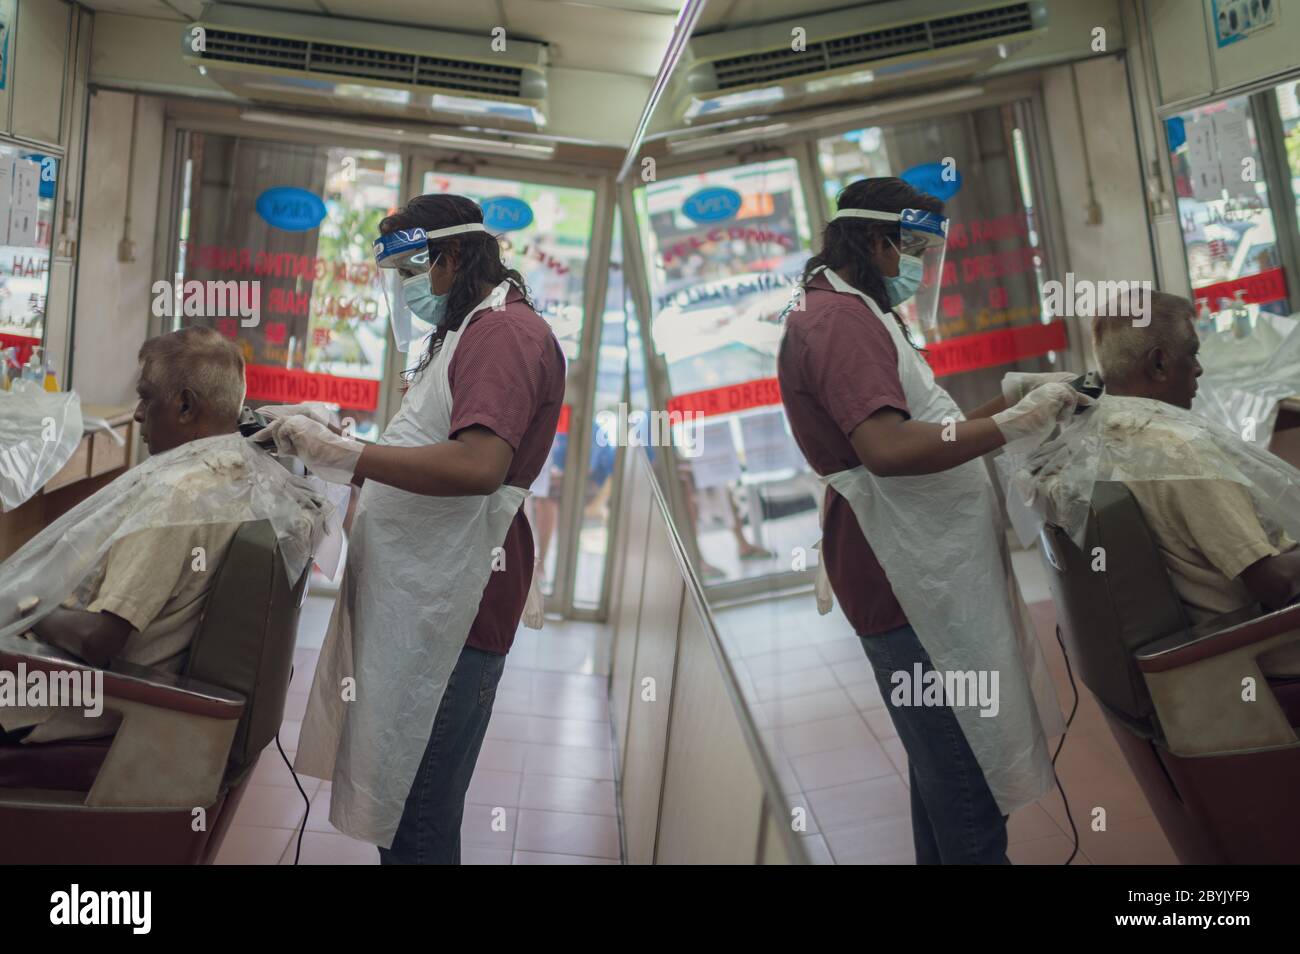 Kuala Lumpur, Malaysia. 10th June, 2020. A barber cuts hair for a customer at a barbershop in Kuala Lumpur, Malaysia, June 10, 2020. TO GO WITH 'Feature: Malaysians brave adventure in barbershops as COVID-19 restrictions ease' Credit: Zhu Wei/Xinhua/Alamy Live News Stock Photo